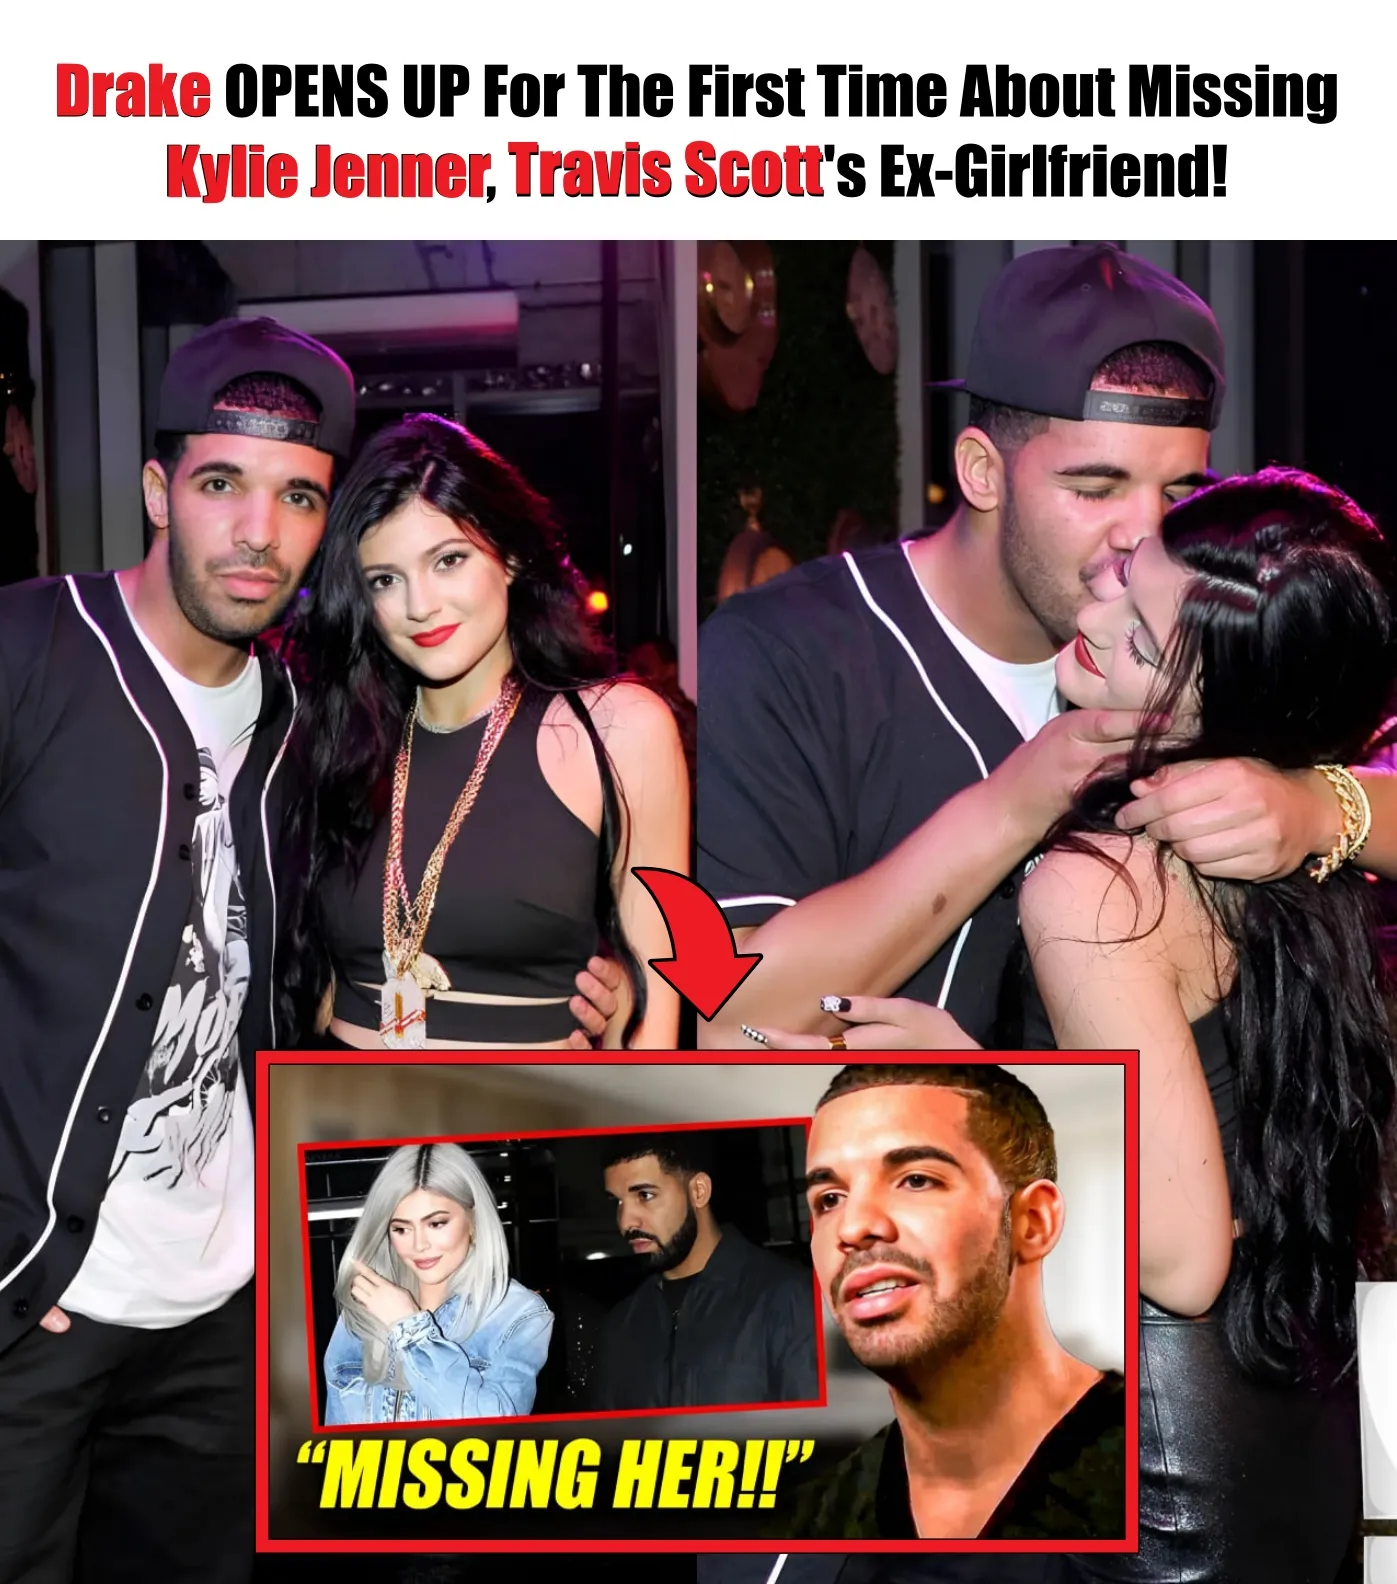 Cover Image for Drake OPENS UP For The First Time About Missing Kylie Jenner, Travis Scott’s Ex-Girlfriend!